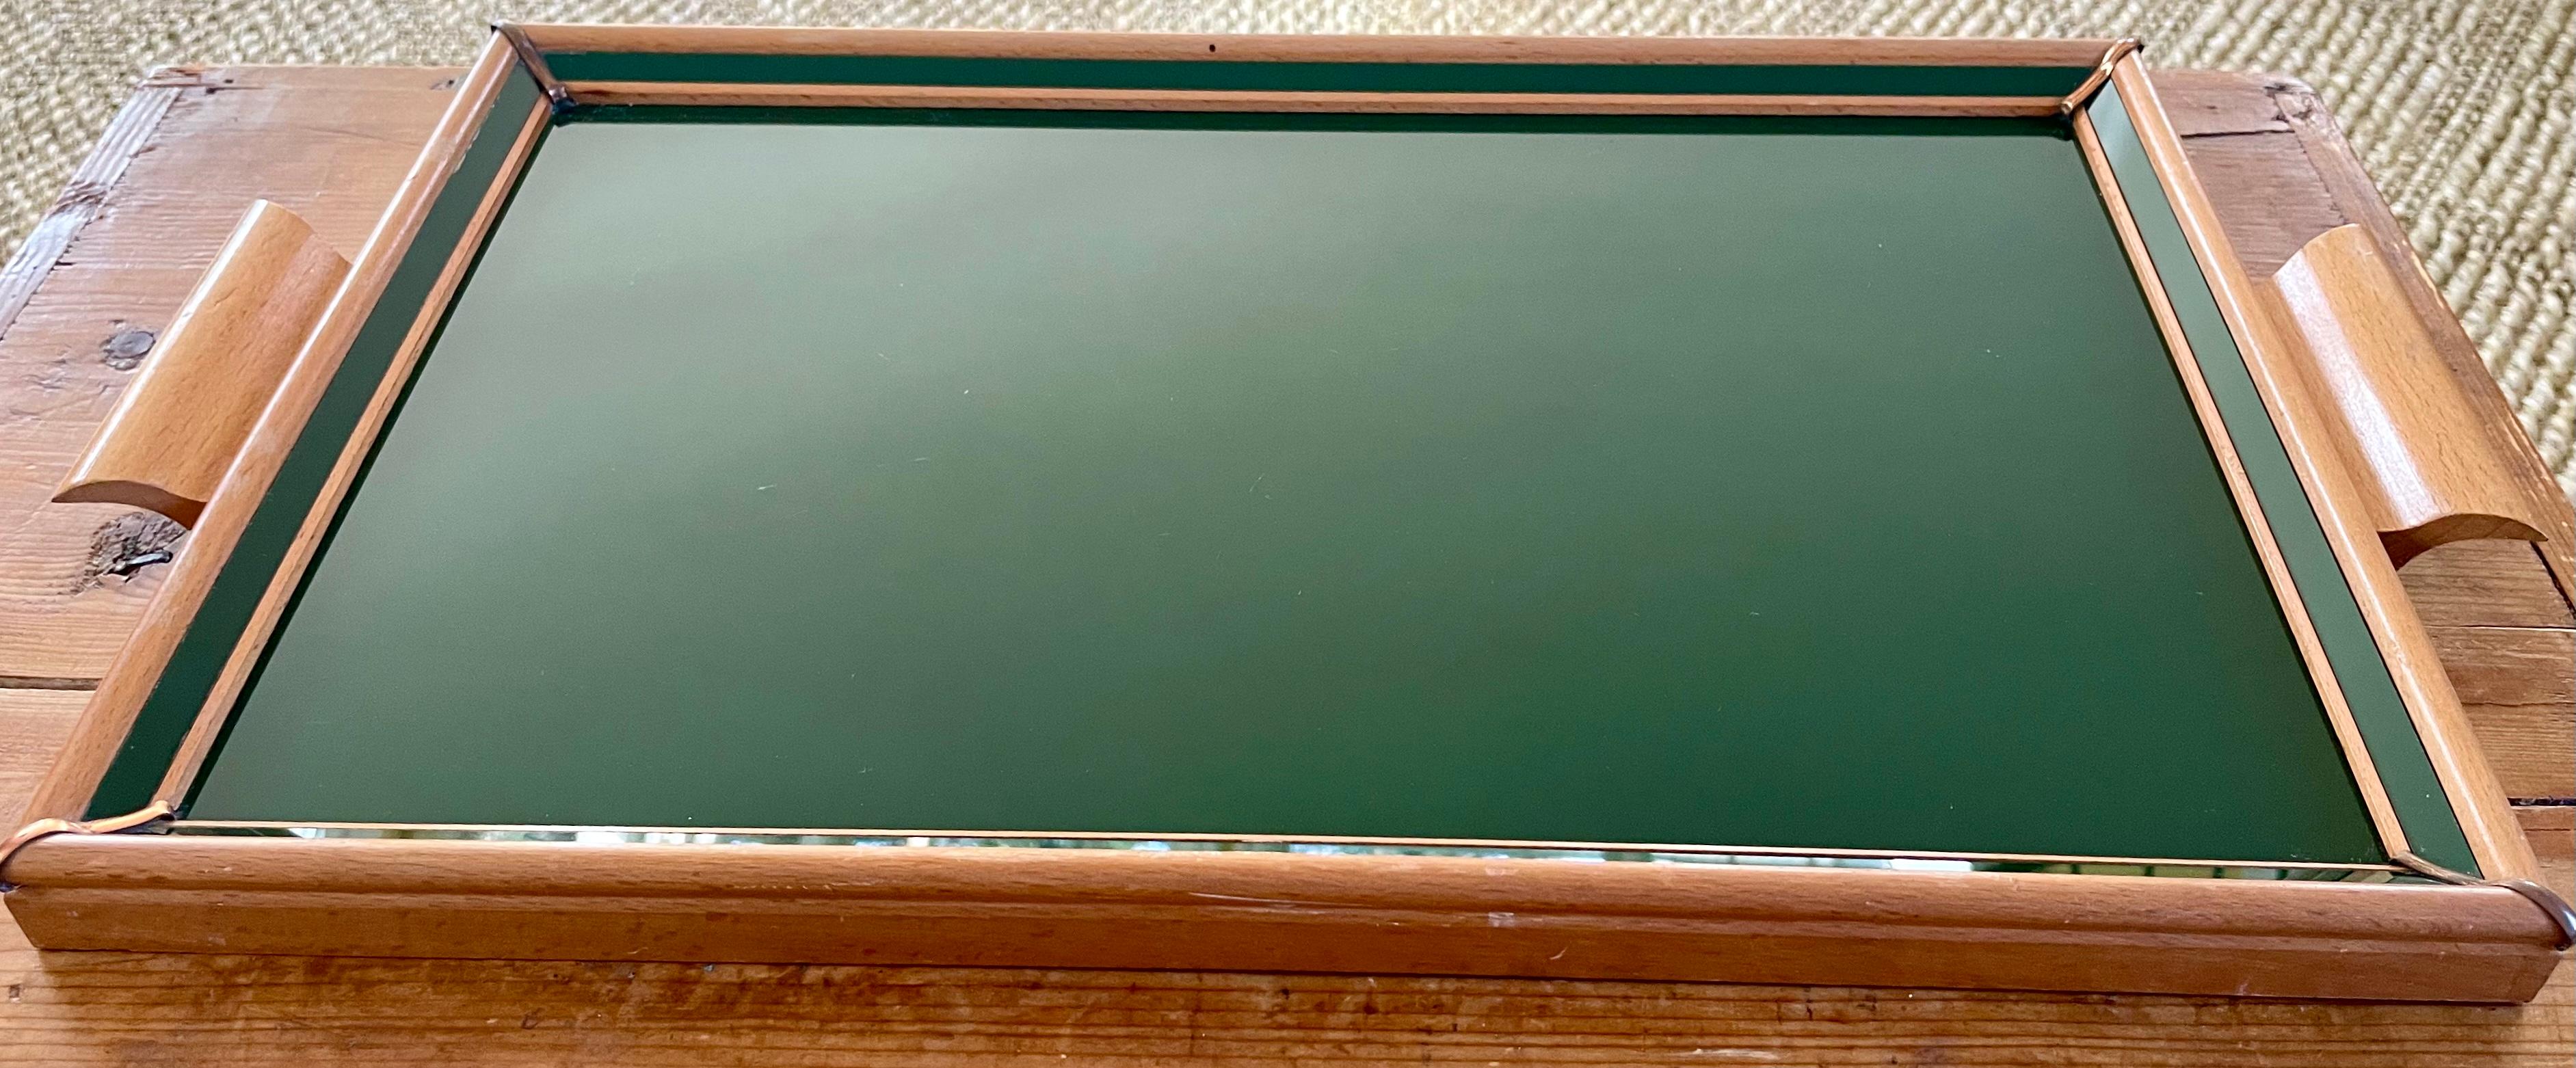 Forties Italian green glass and wood tray. Pale wood framed and handled glass serving tray with green under painted surface with additional angled glass bordering panels.
Dimensions: 20